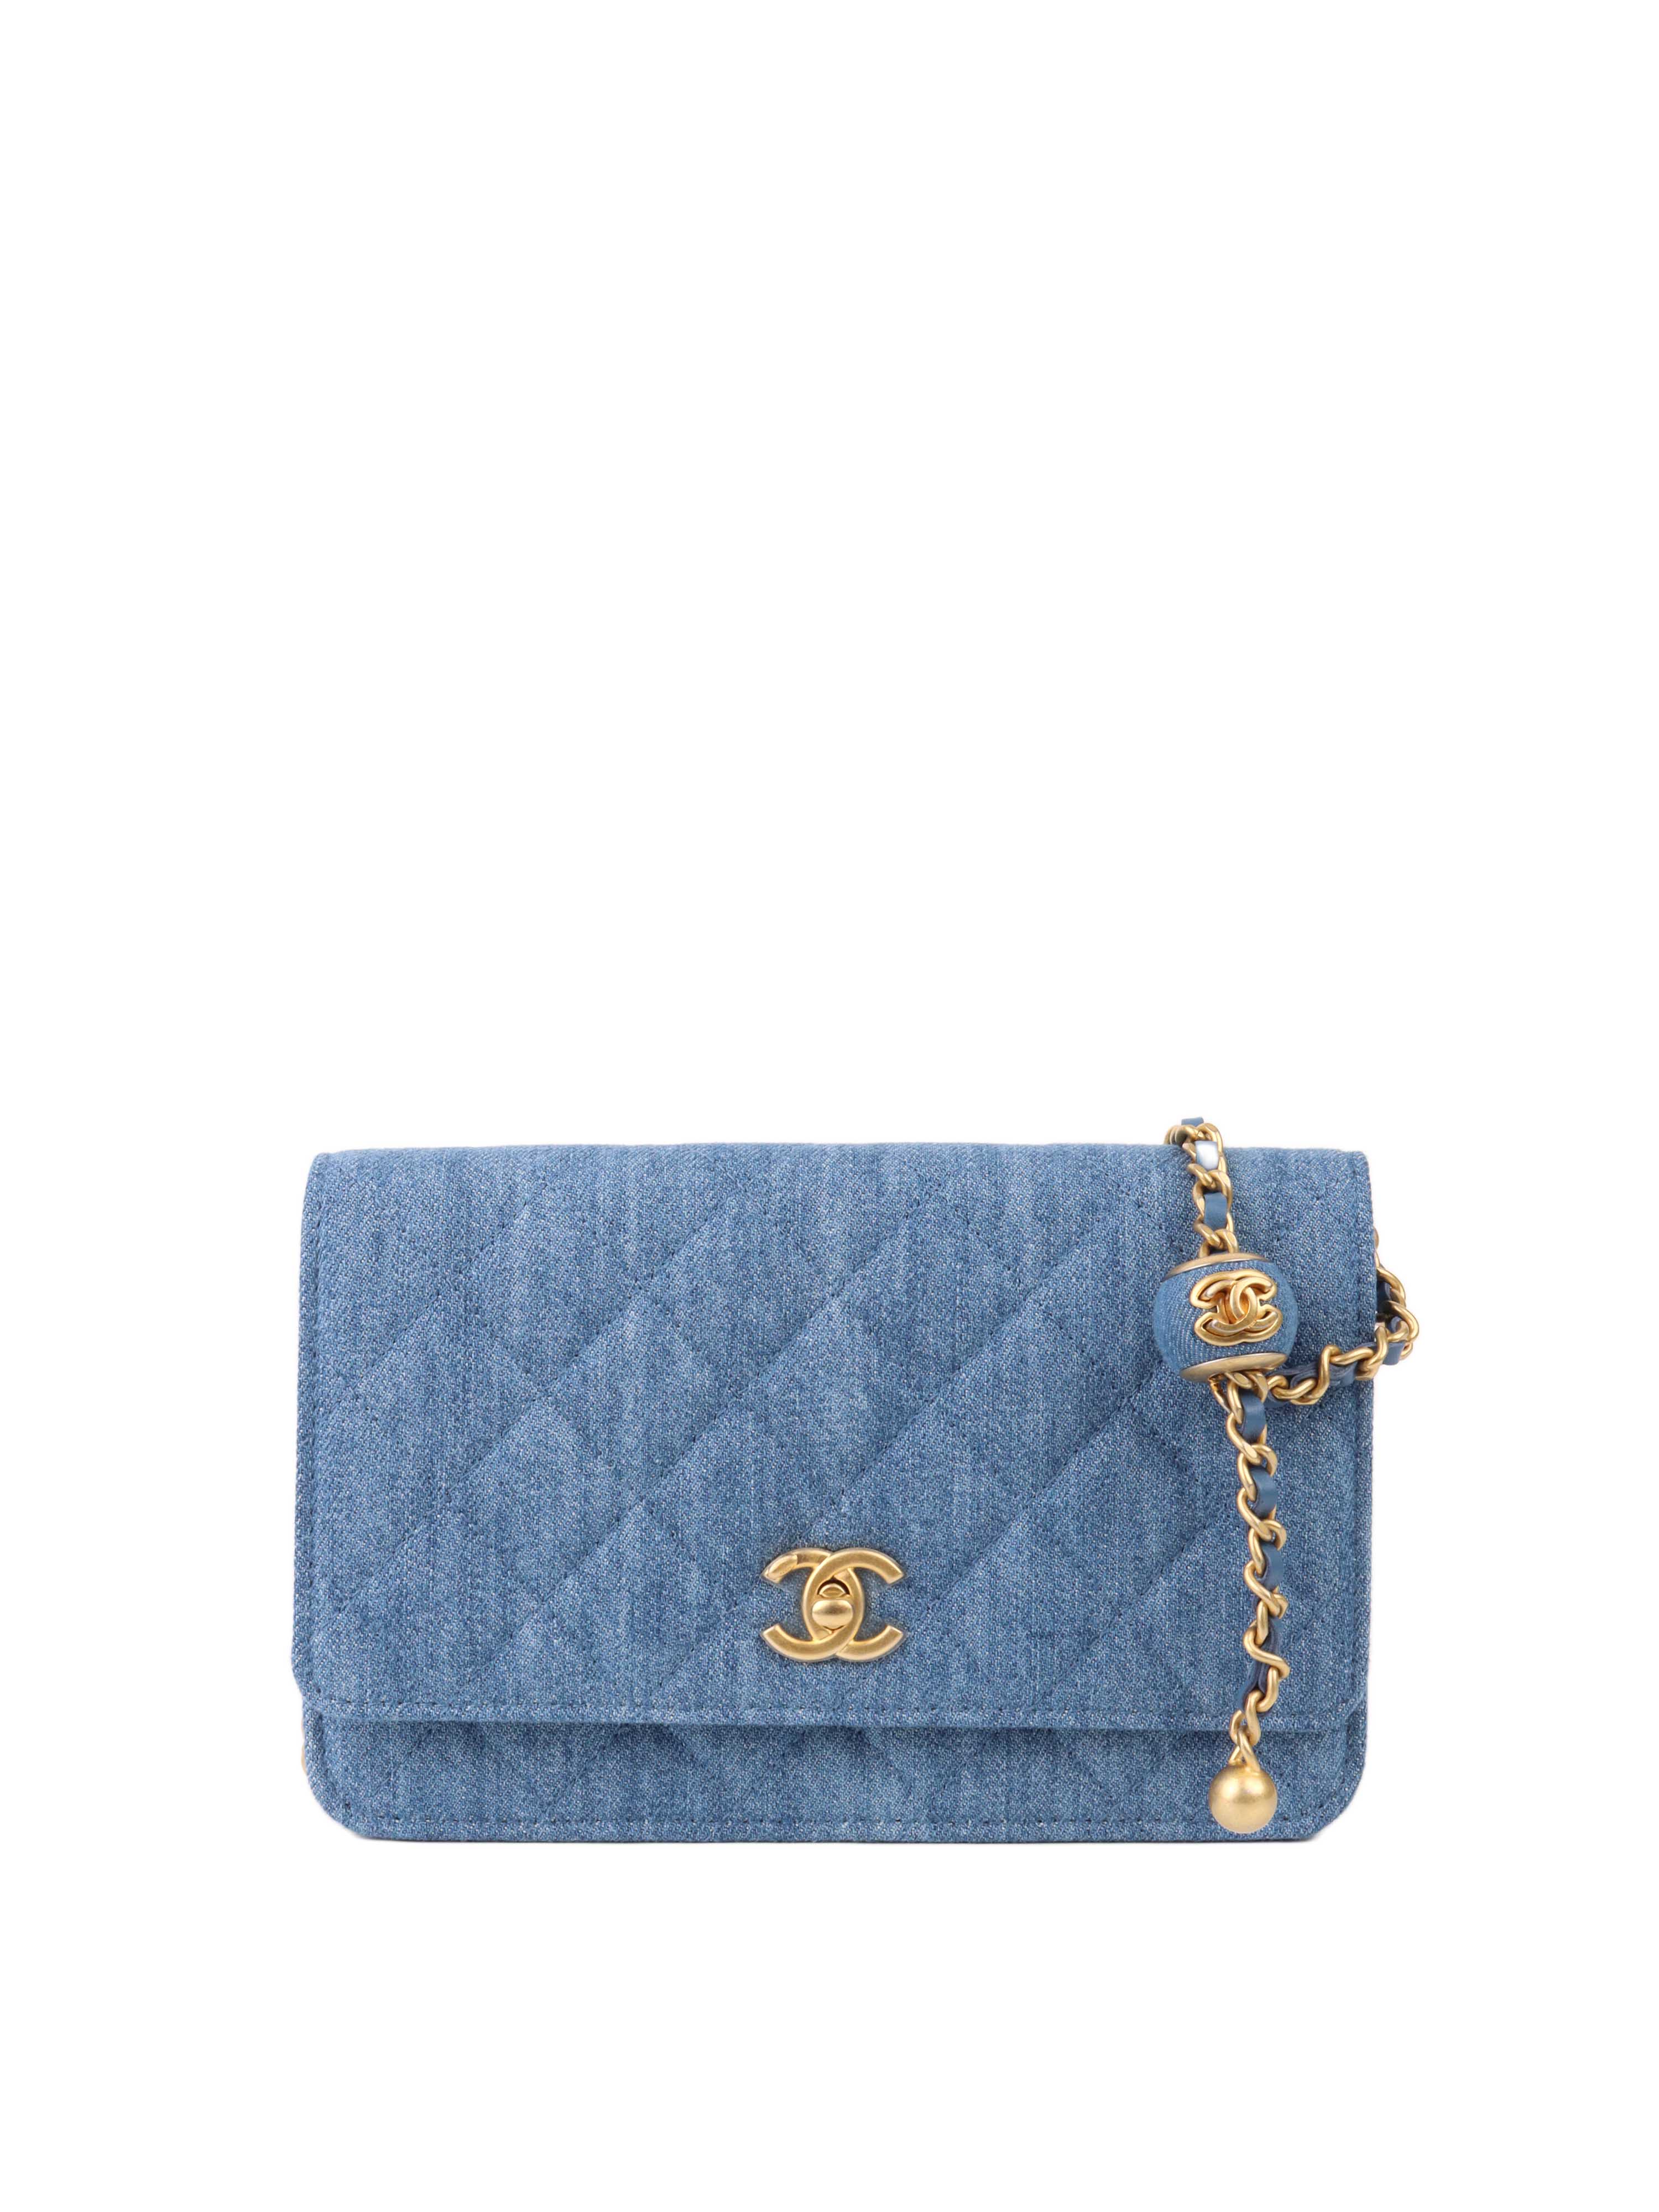 Chanel 22C Denim Wallet on Chain with Pearl Crush.